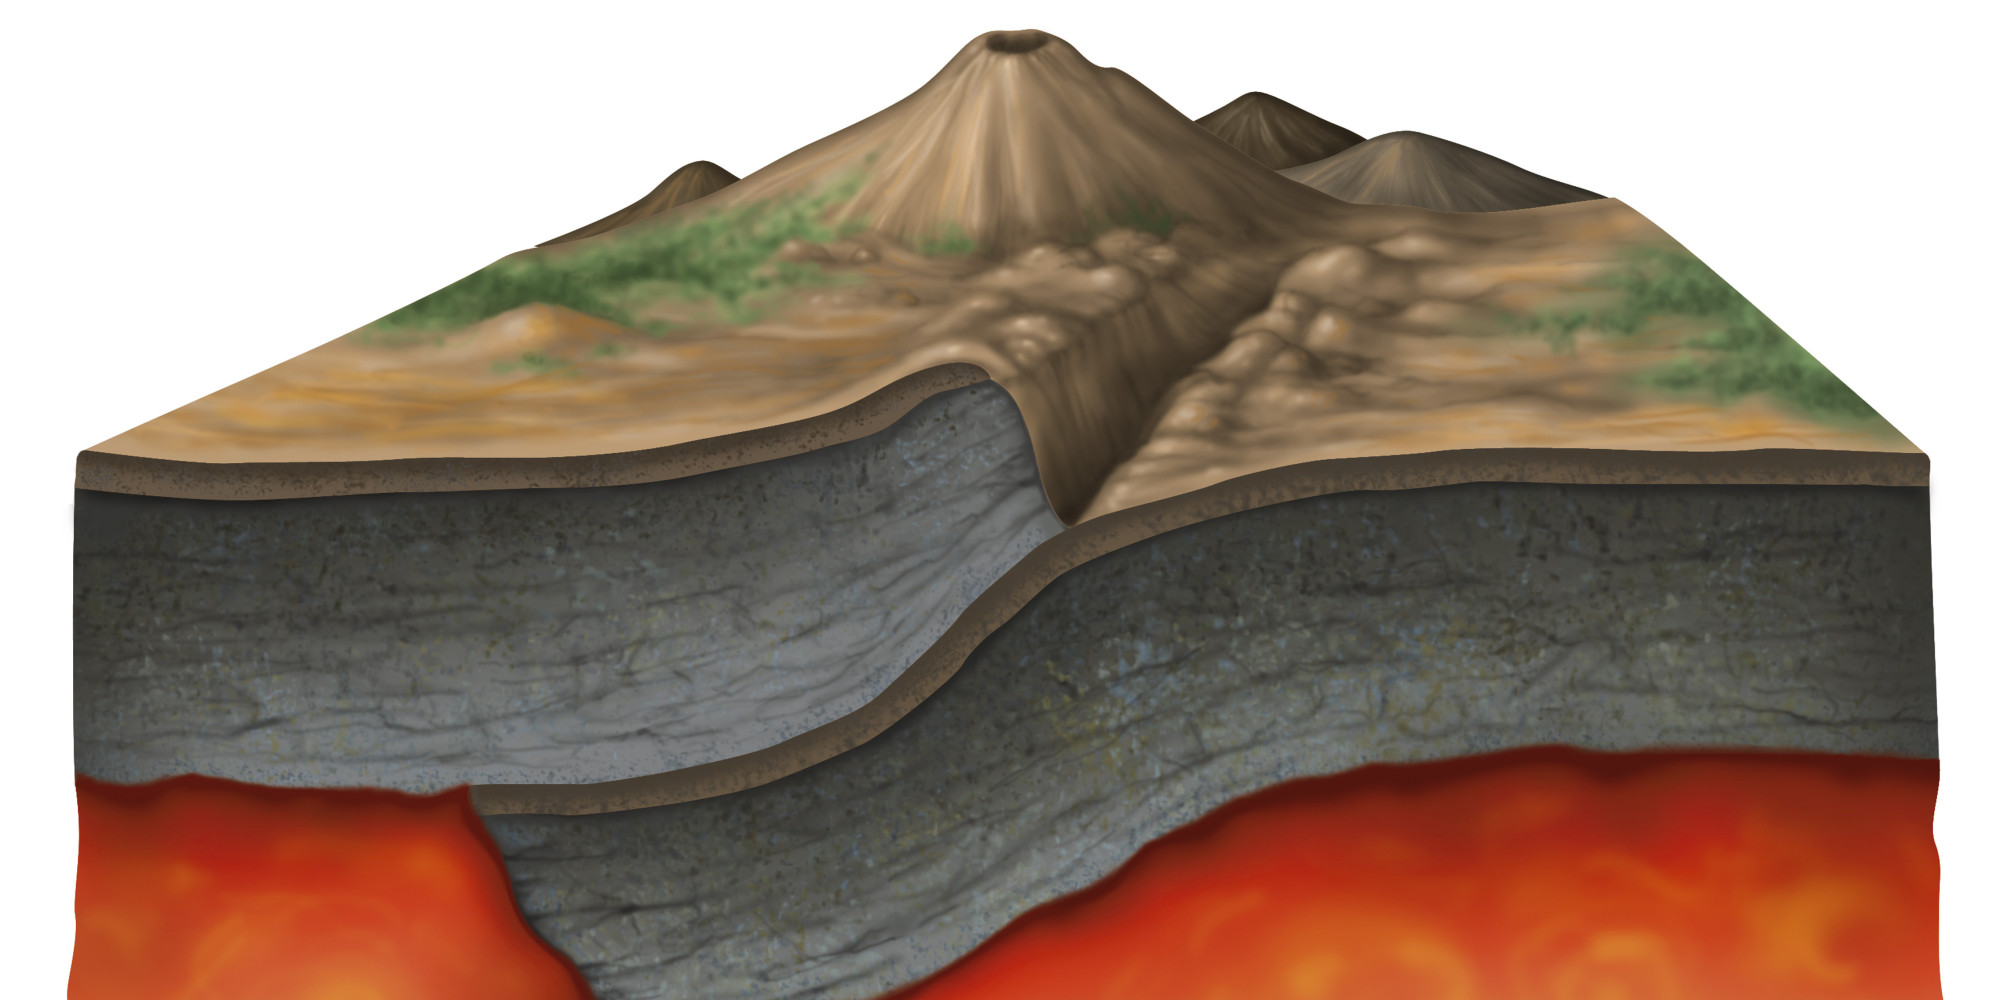 New Plate Tectonics Model May Explain How Continents Grow ...